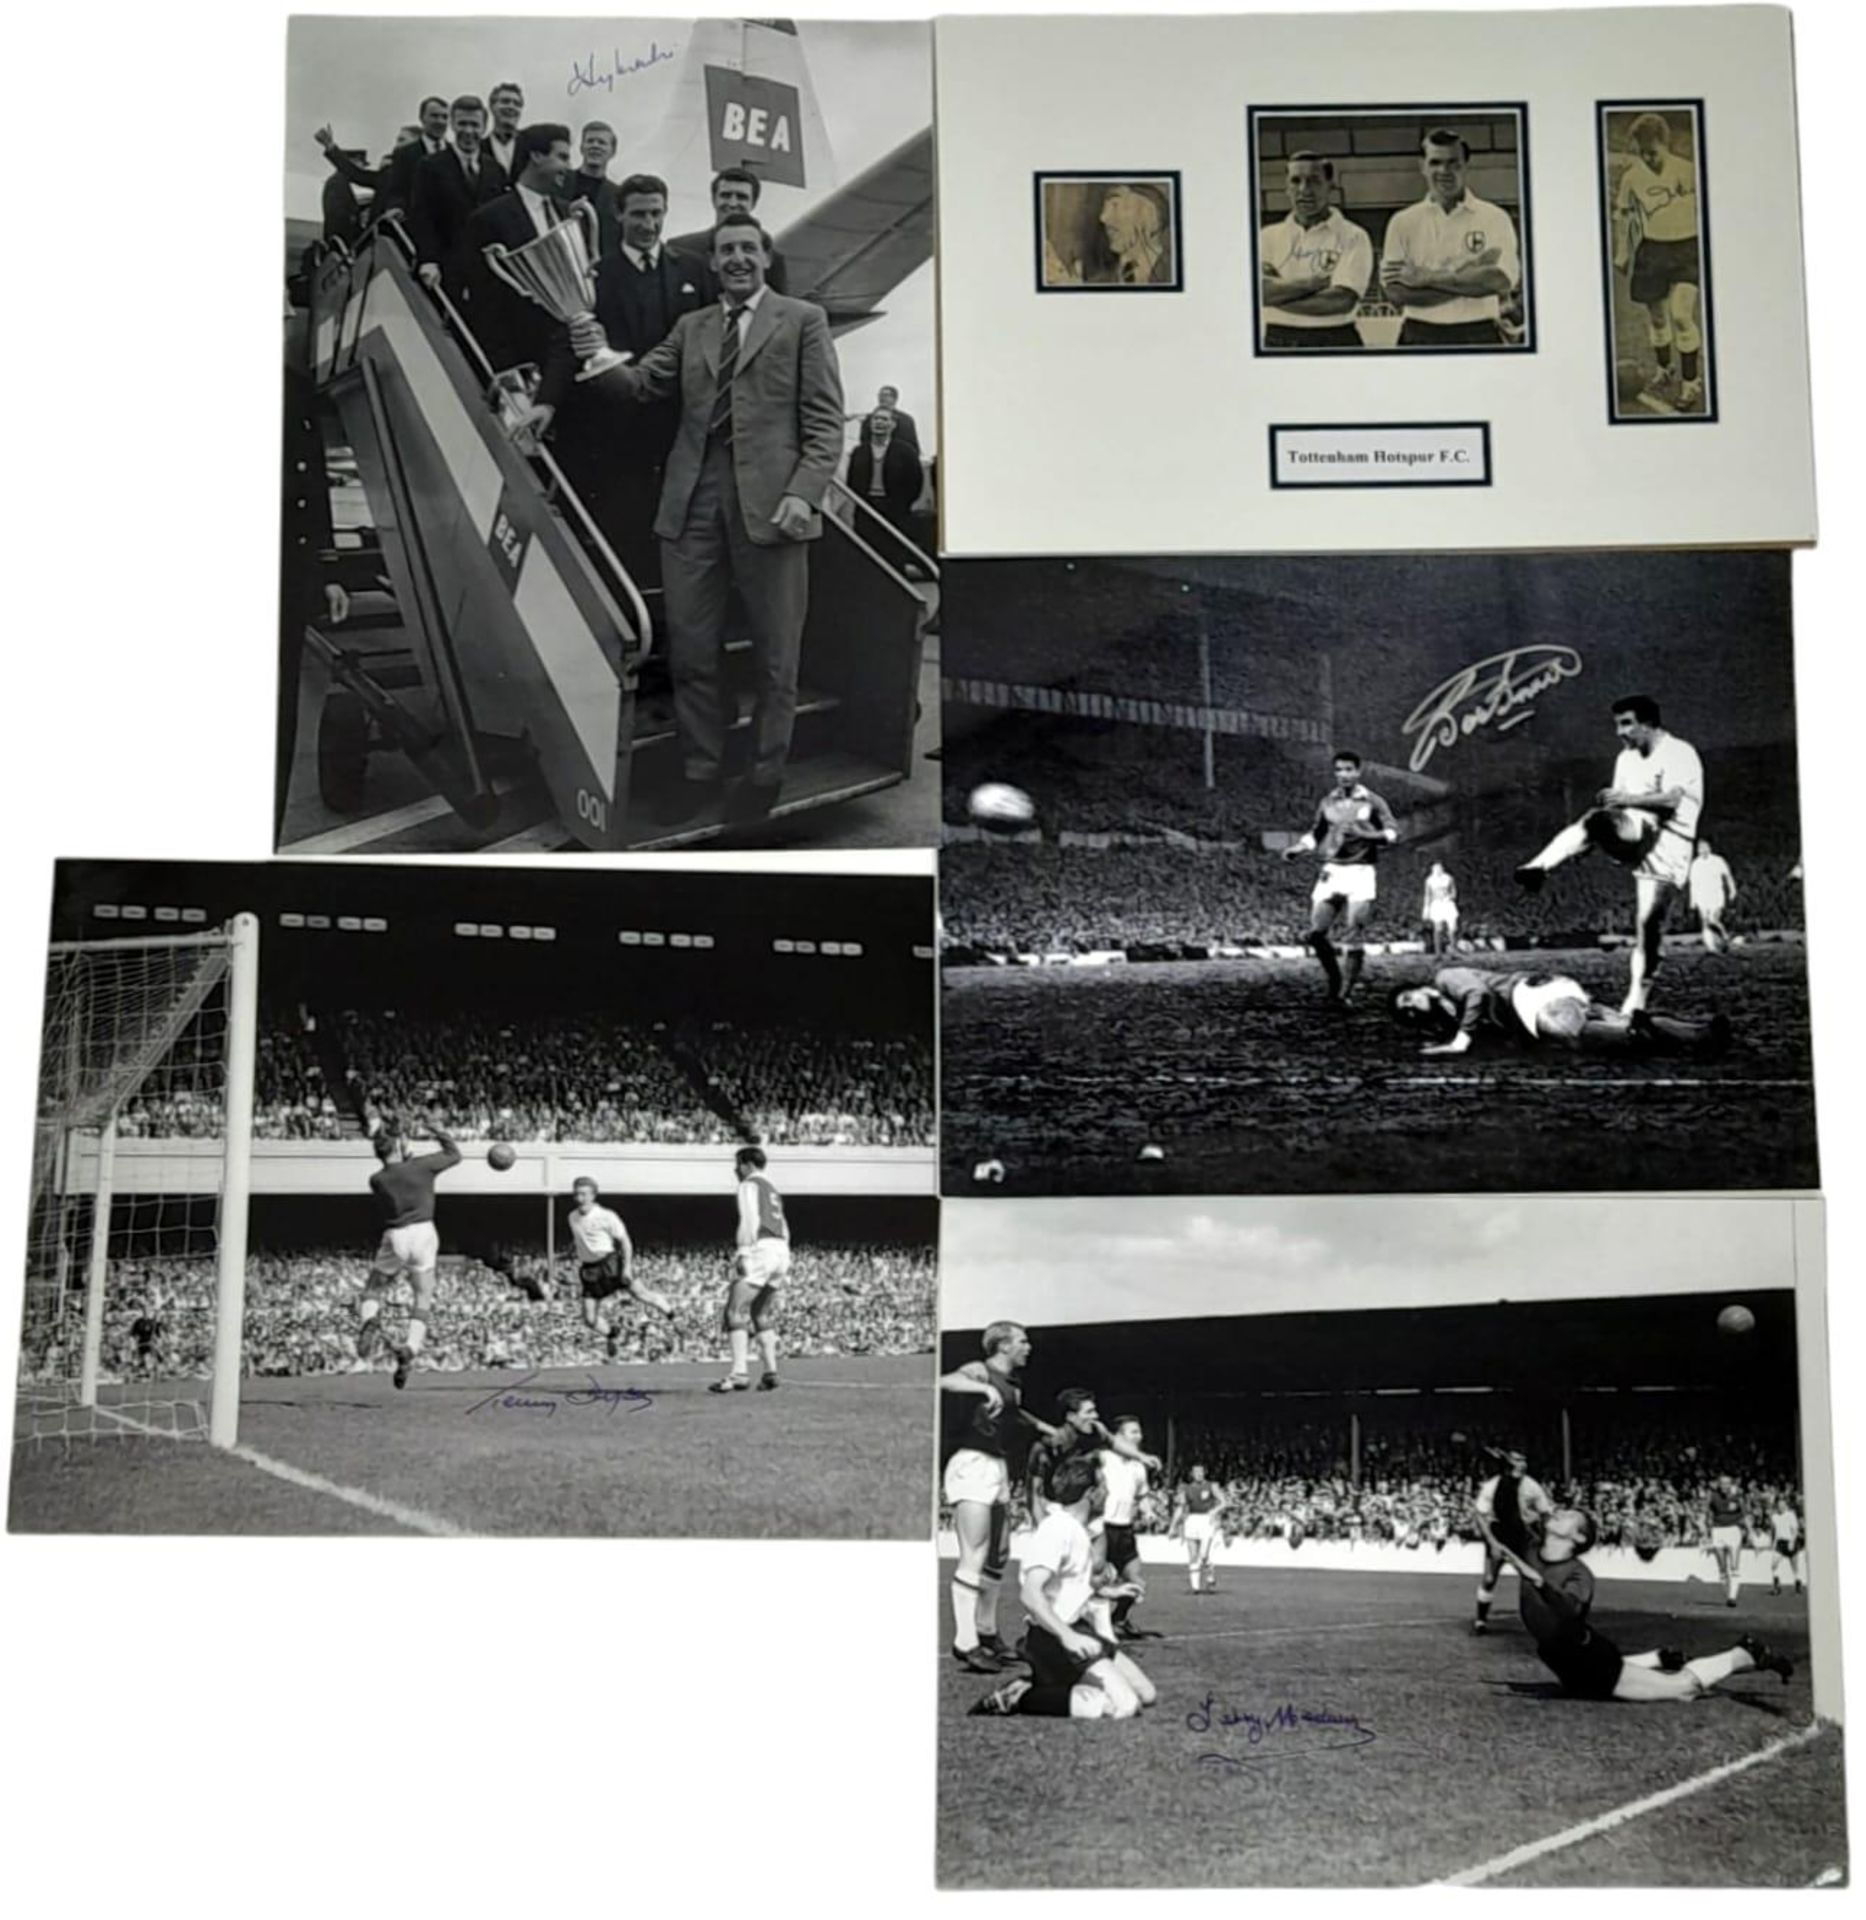 A MOUNTED PRESNTATION WITH AUTOGRAPHED PHOTOS OF BLANCHFLOWER , ROBB , DUQUEMIN AND JOHN WHITE